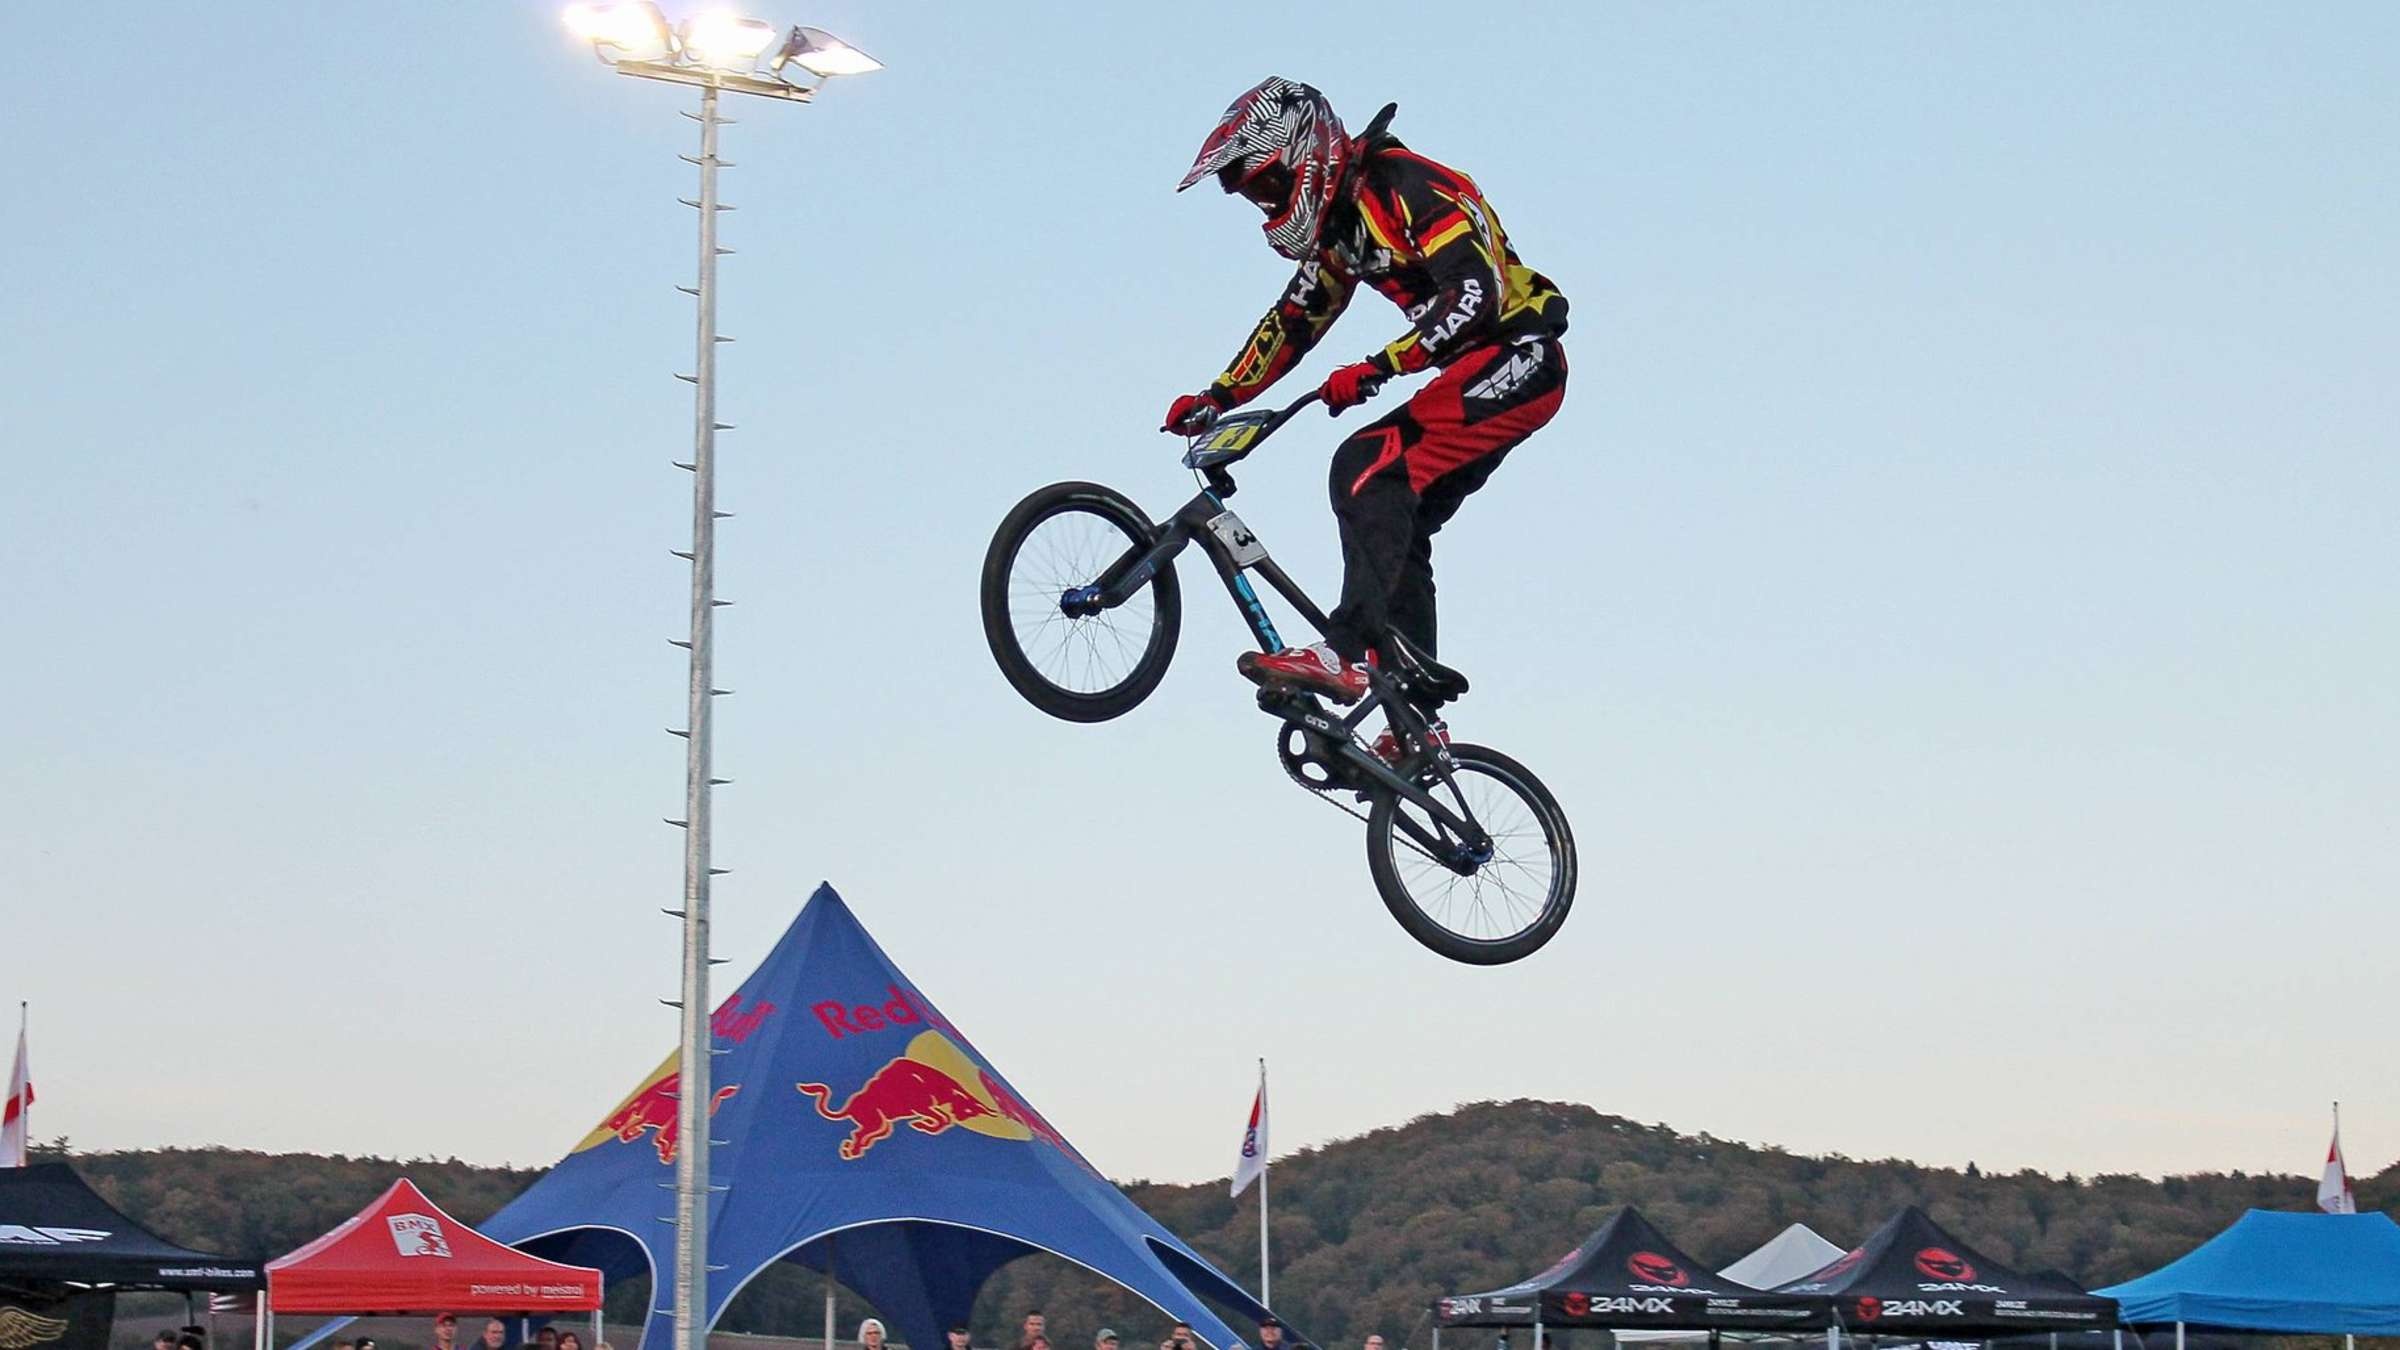 BMX (Sports): BMX Competition in Ahnatal, Athlete Takes Bicycle To The Air, Red Bull Tournament, Motocross Stunts. 2400x1350 HD Wallpaper.